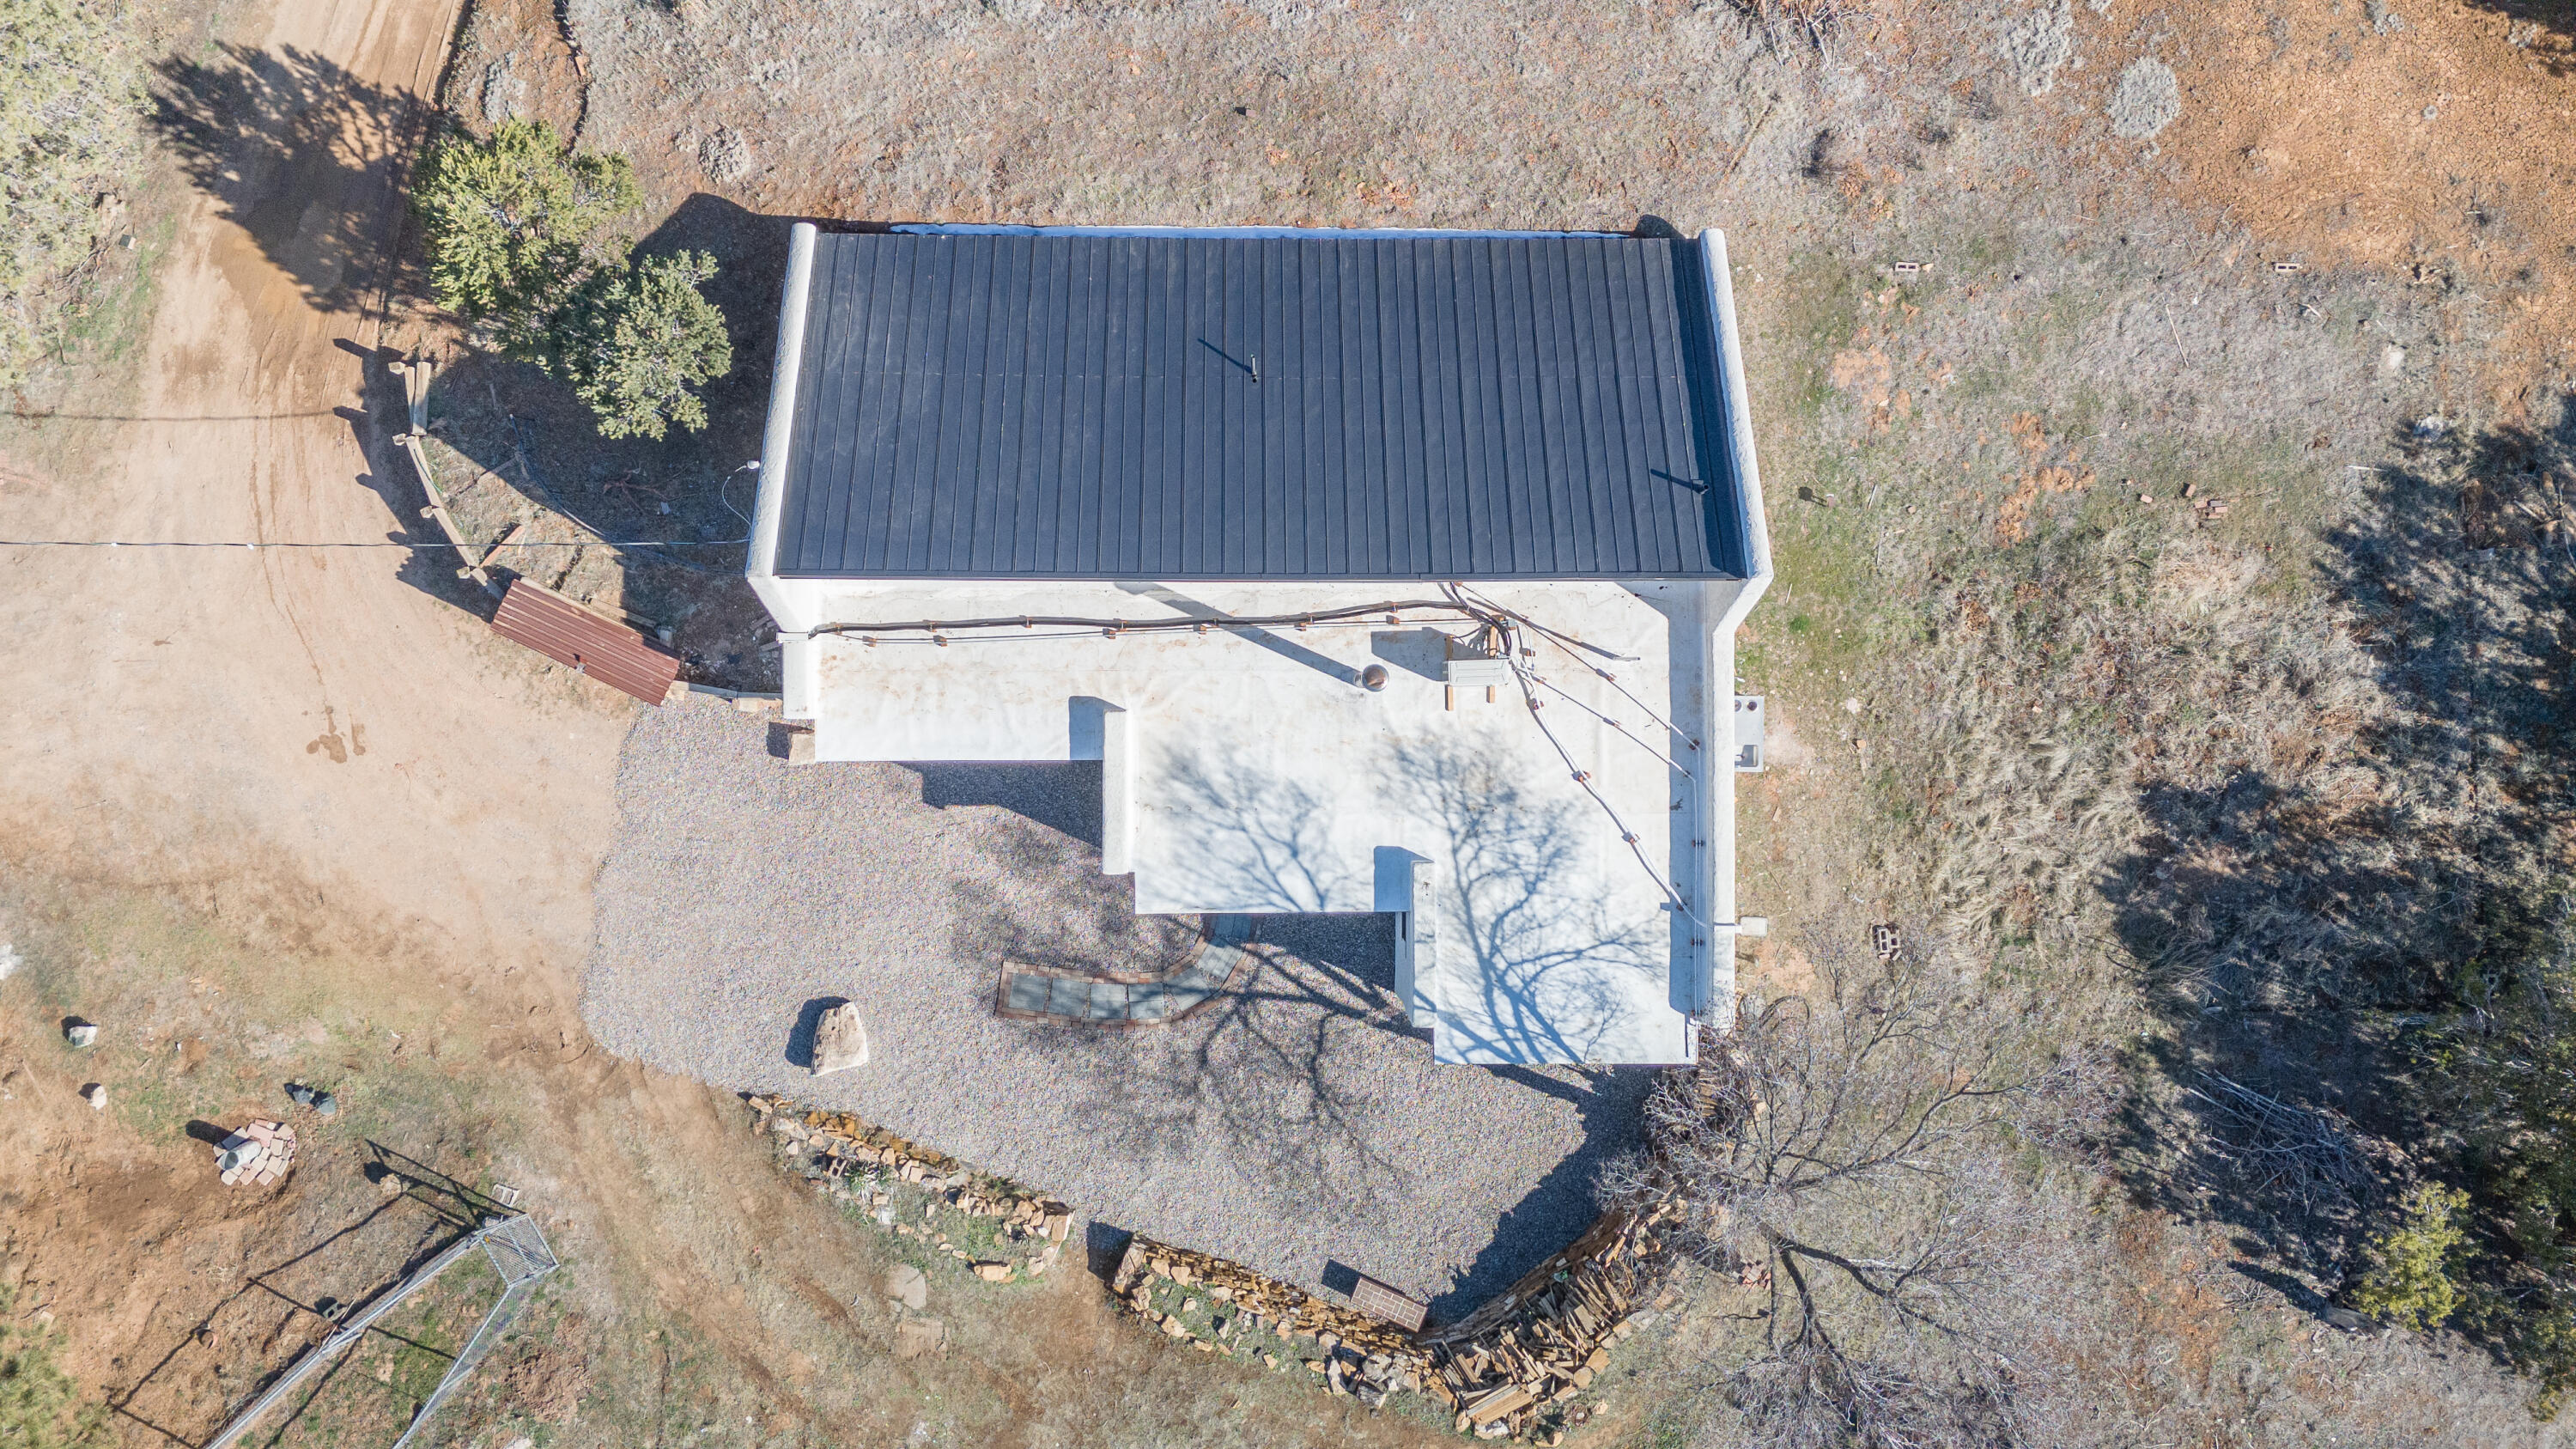 10 Wright Drive, Tijeras, New Mexico 87059, 2 Bedrooms Bedrooms, ,2 BathroomsBathrooms,Residential,For Sale,10 Wright Drive,1059180